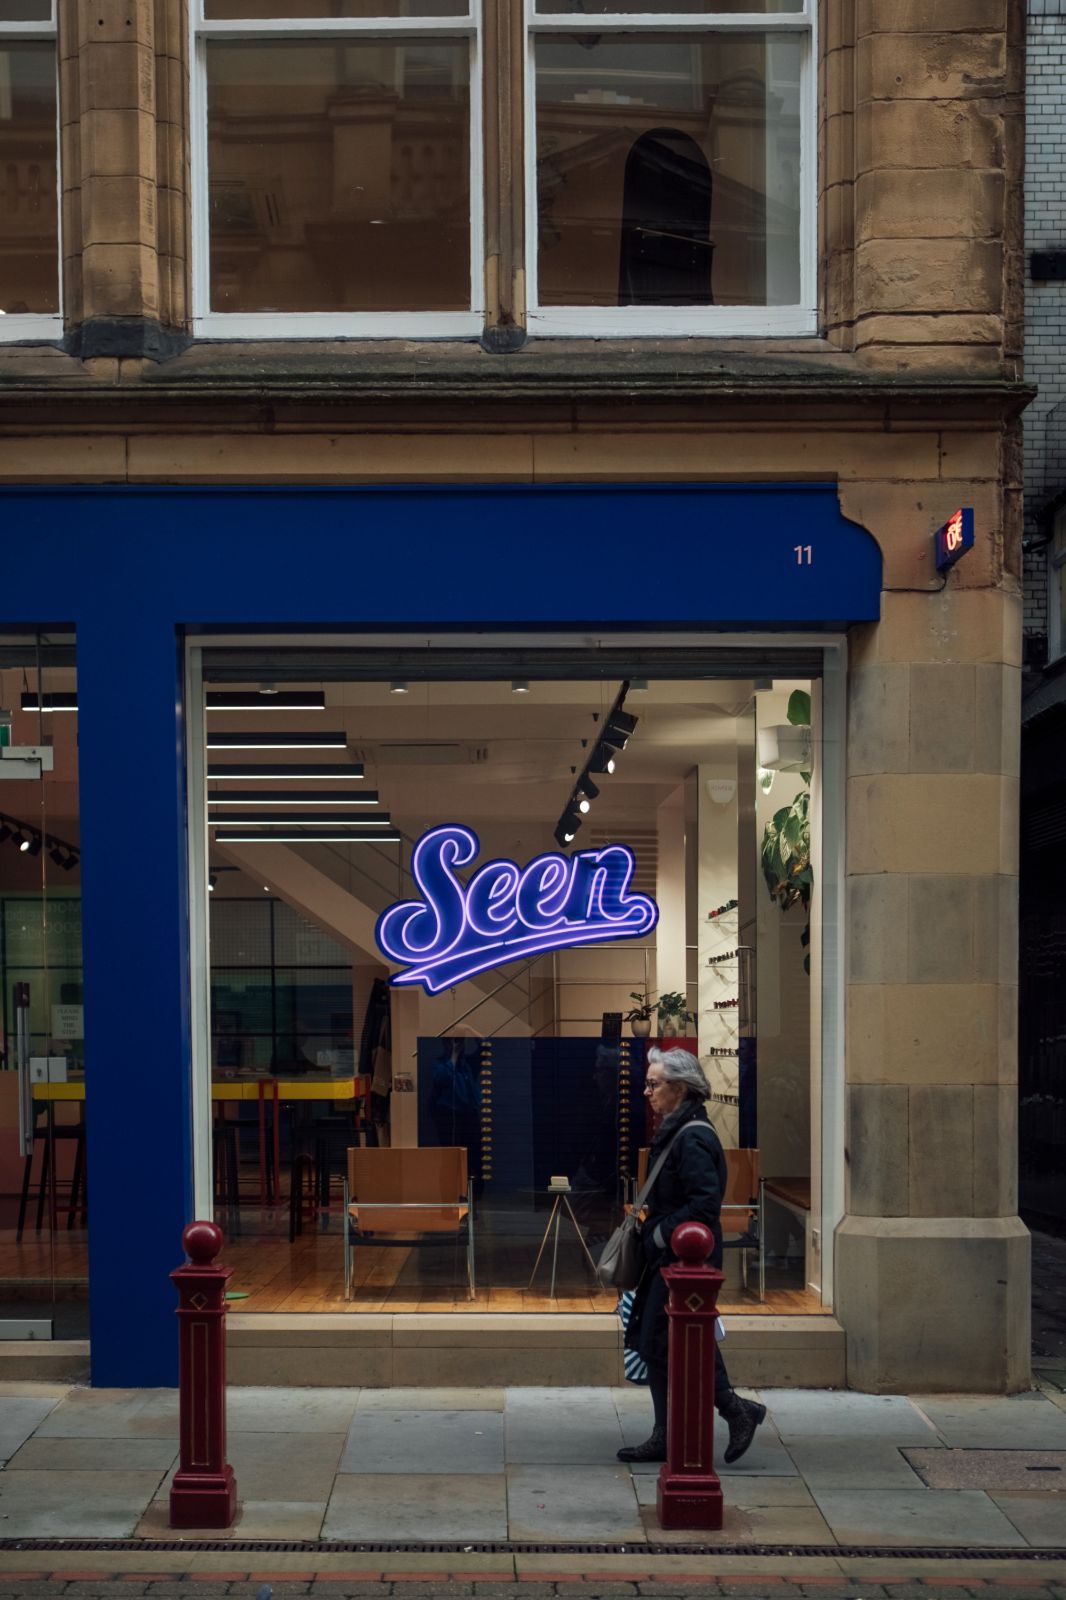 Manchester optician shop front with blue facia, large glass window and blue neon sign of the word Seen